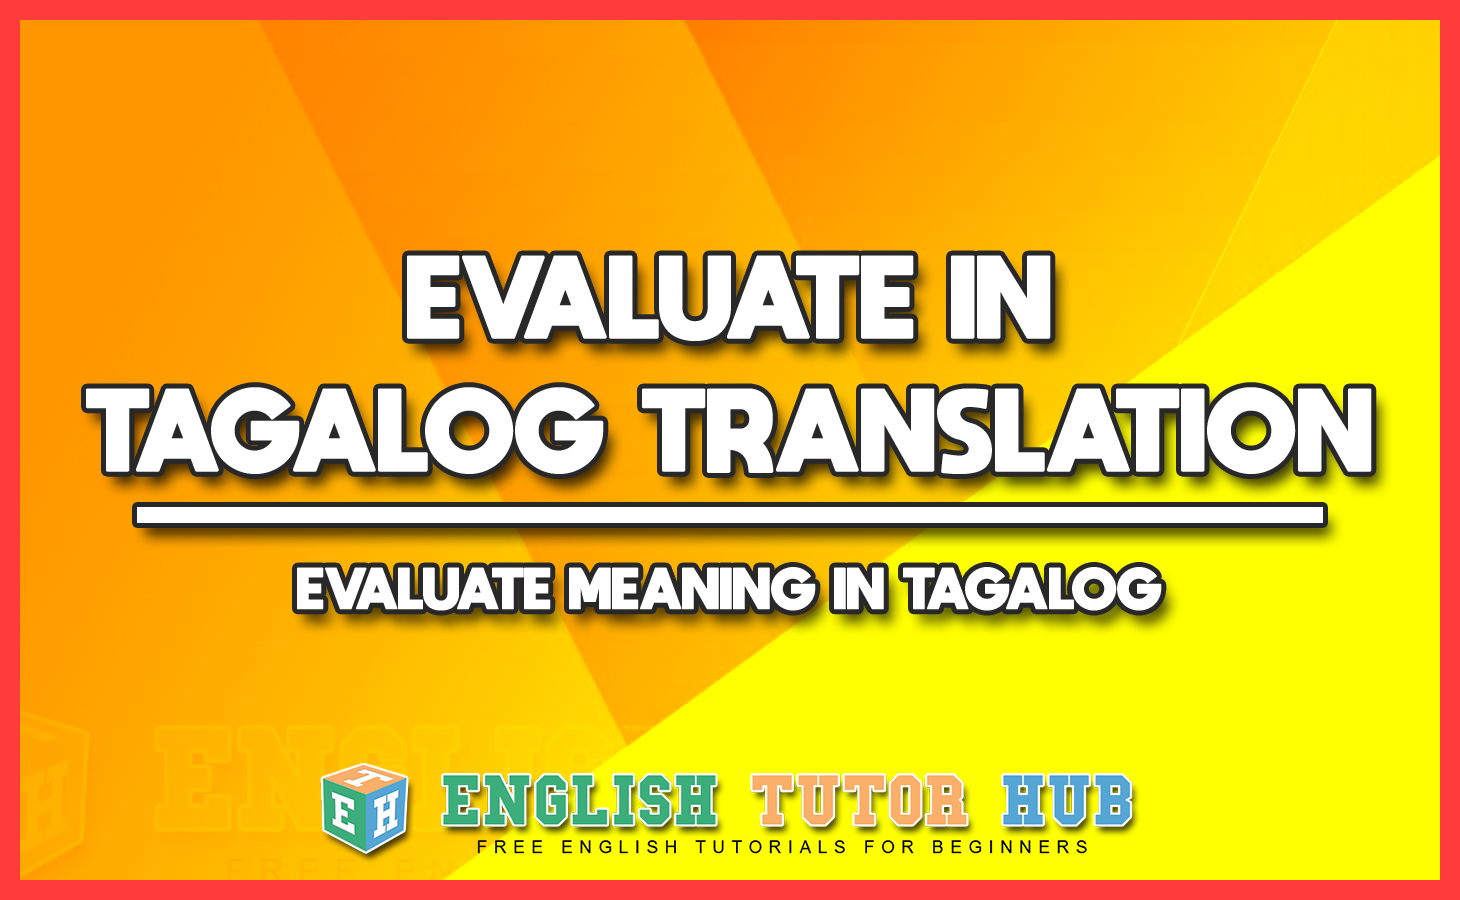 EVALUATE IN TAGALOG TRANSLATION - EVALUATE MEANING IN TAGALOG